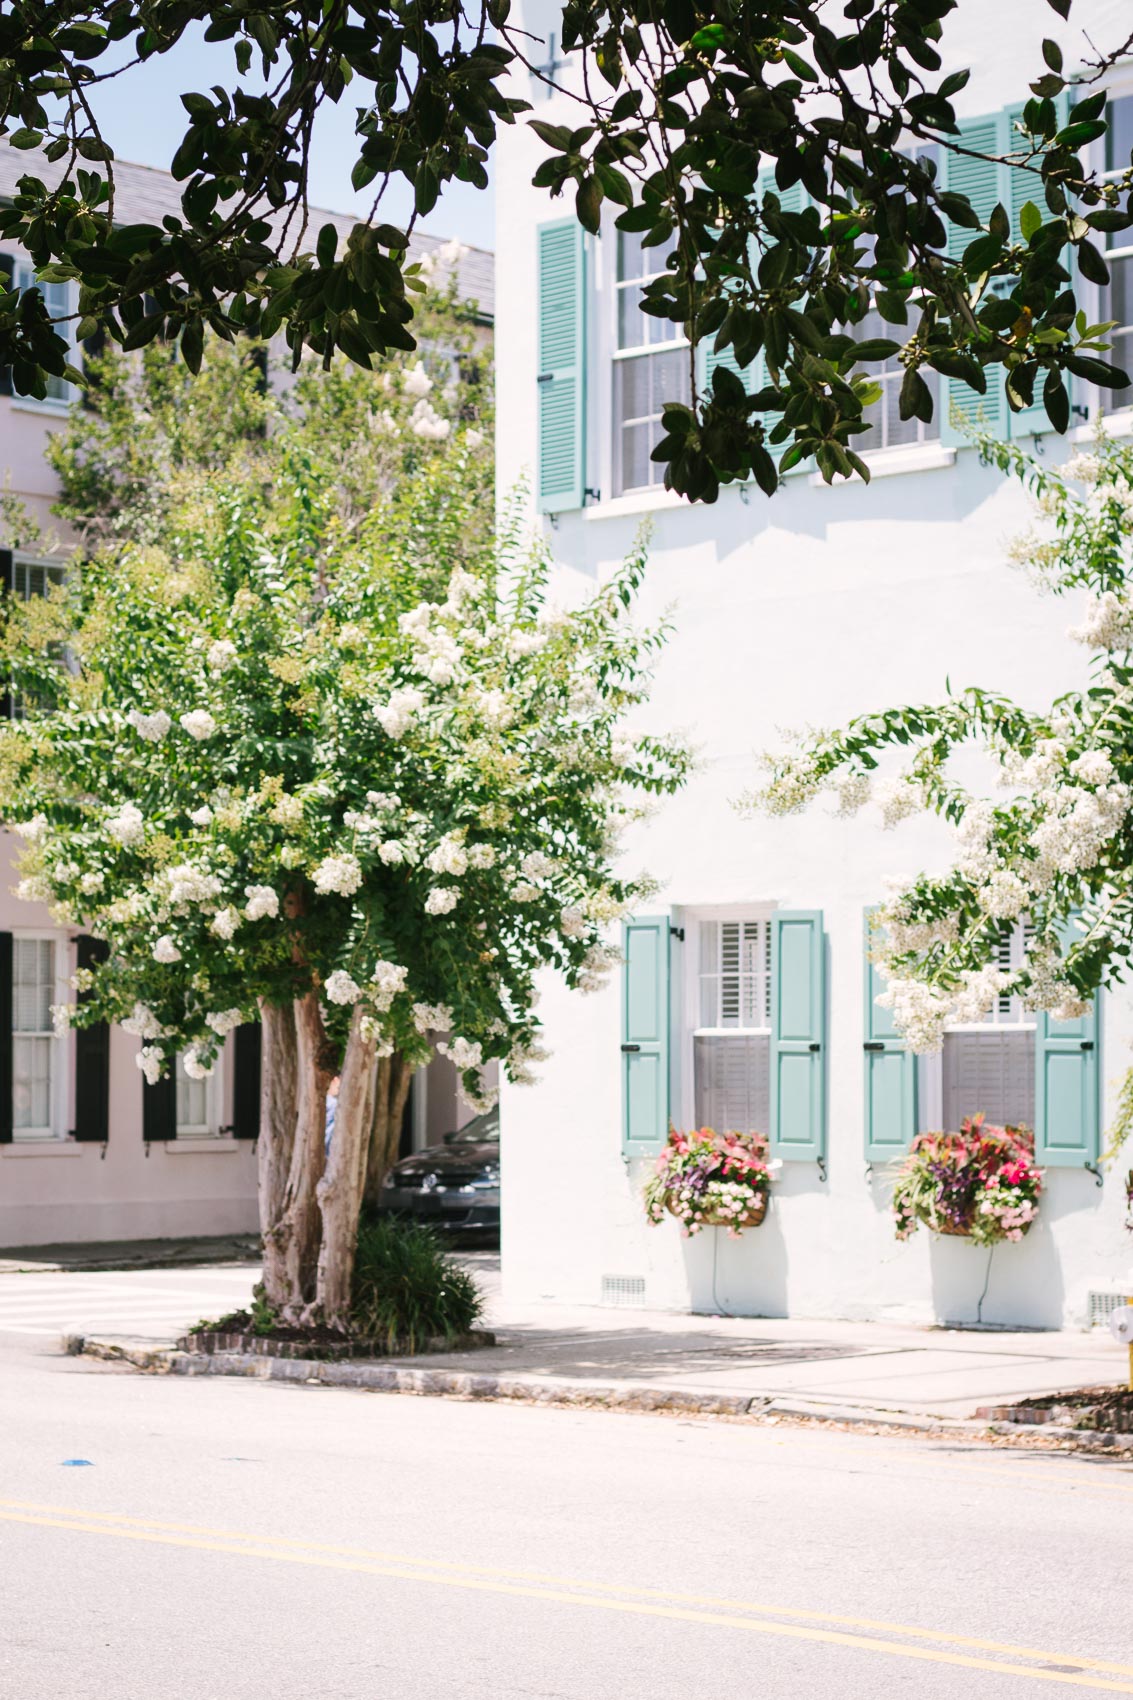 Colorful, pastel homes spotted during a day exploring Charleston, SC